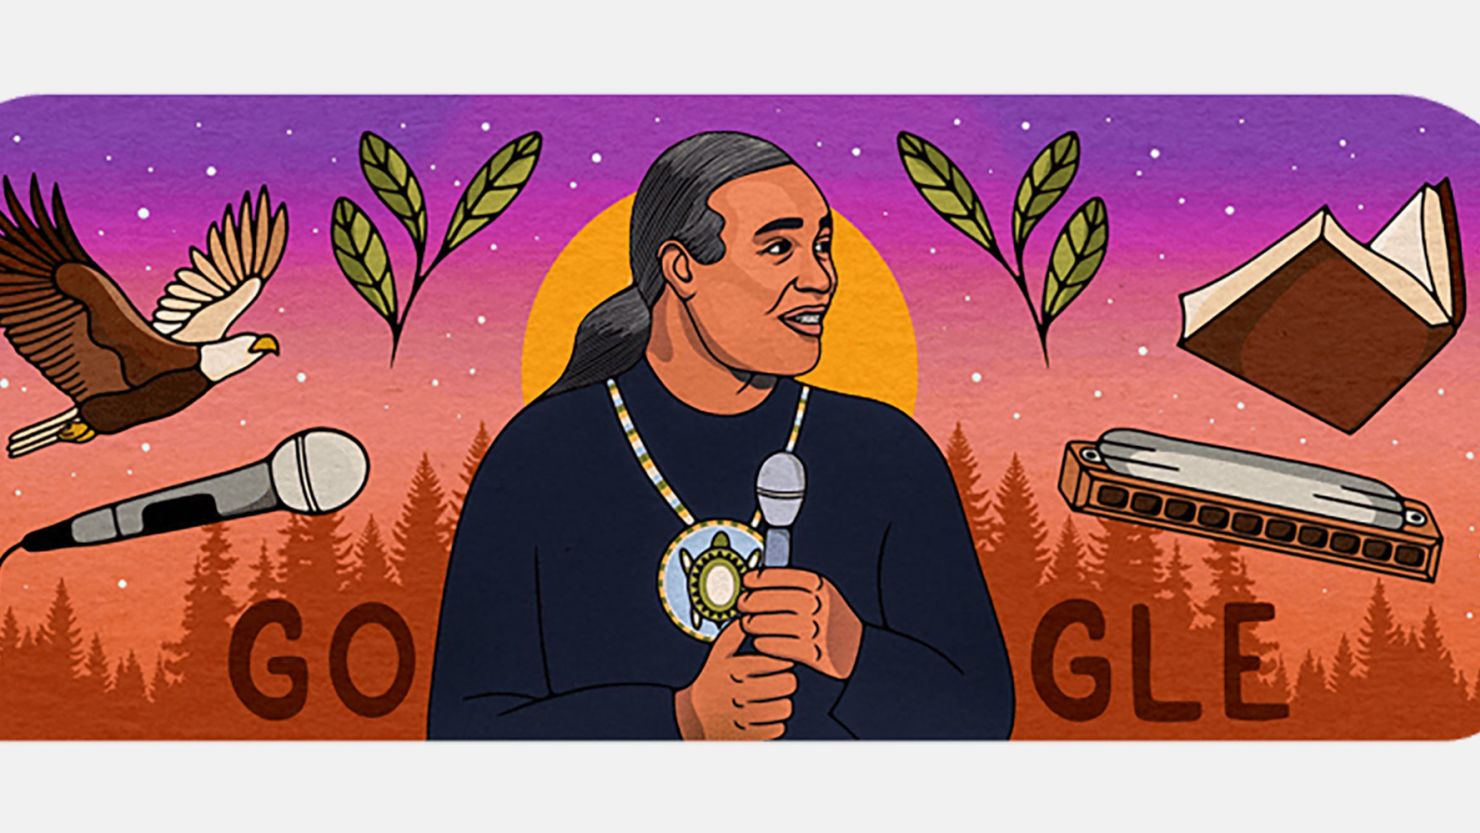 Charlie Hill, a barrier-breaking Native American stand-up comedian, was honored with a Google Doodle on what would've been his 71st birthday.